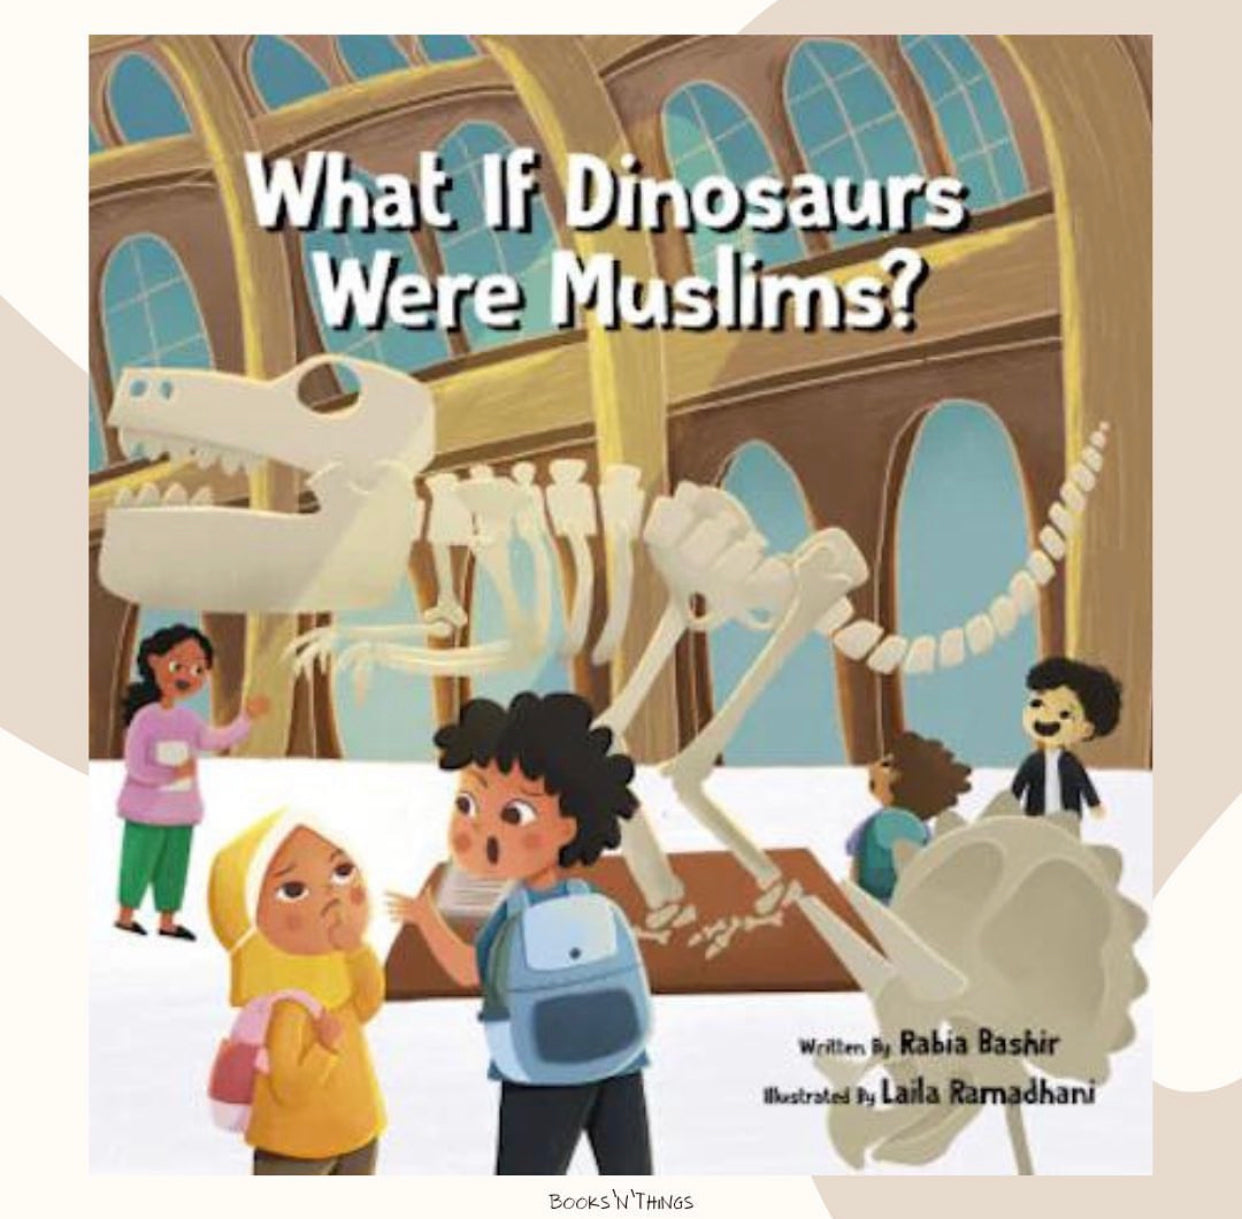 What if Dinosaurs were Muslims?